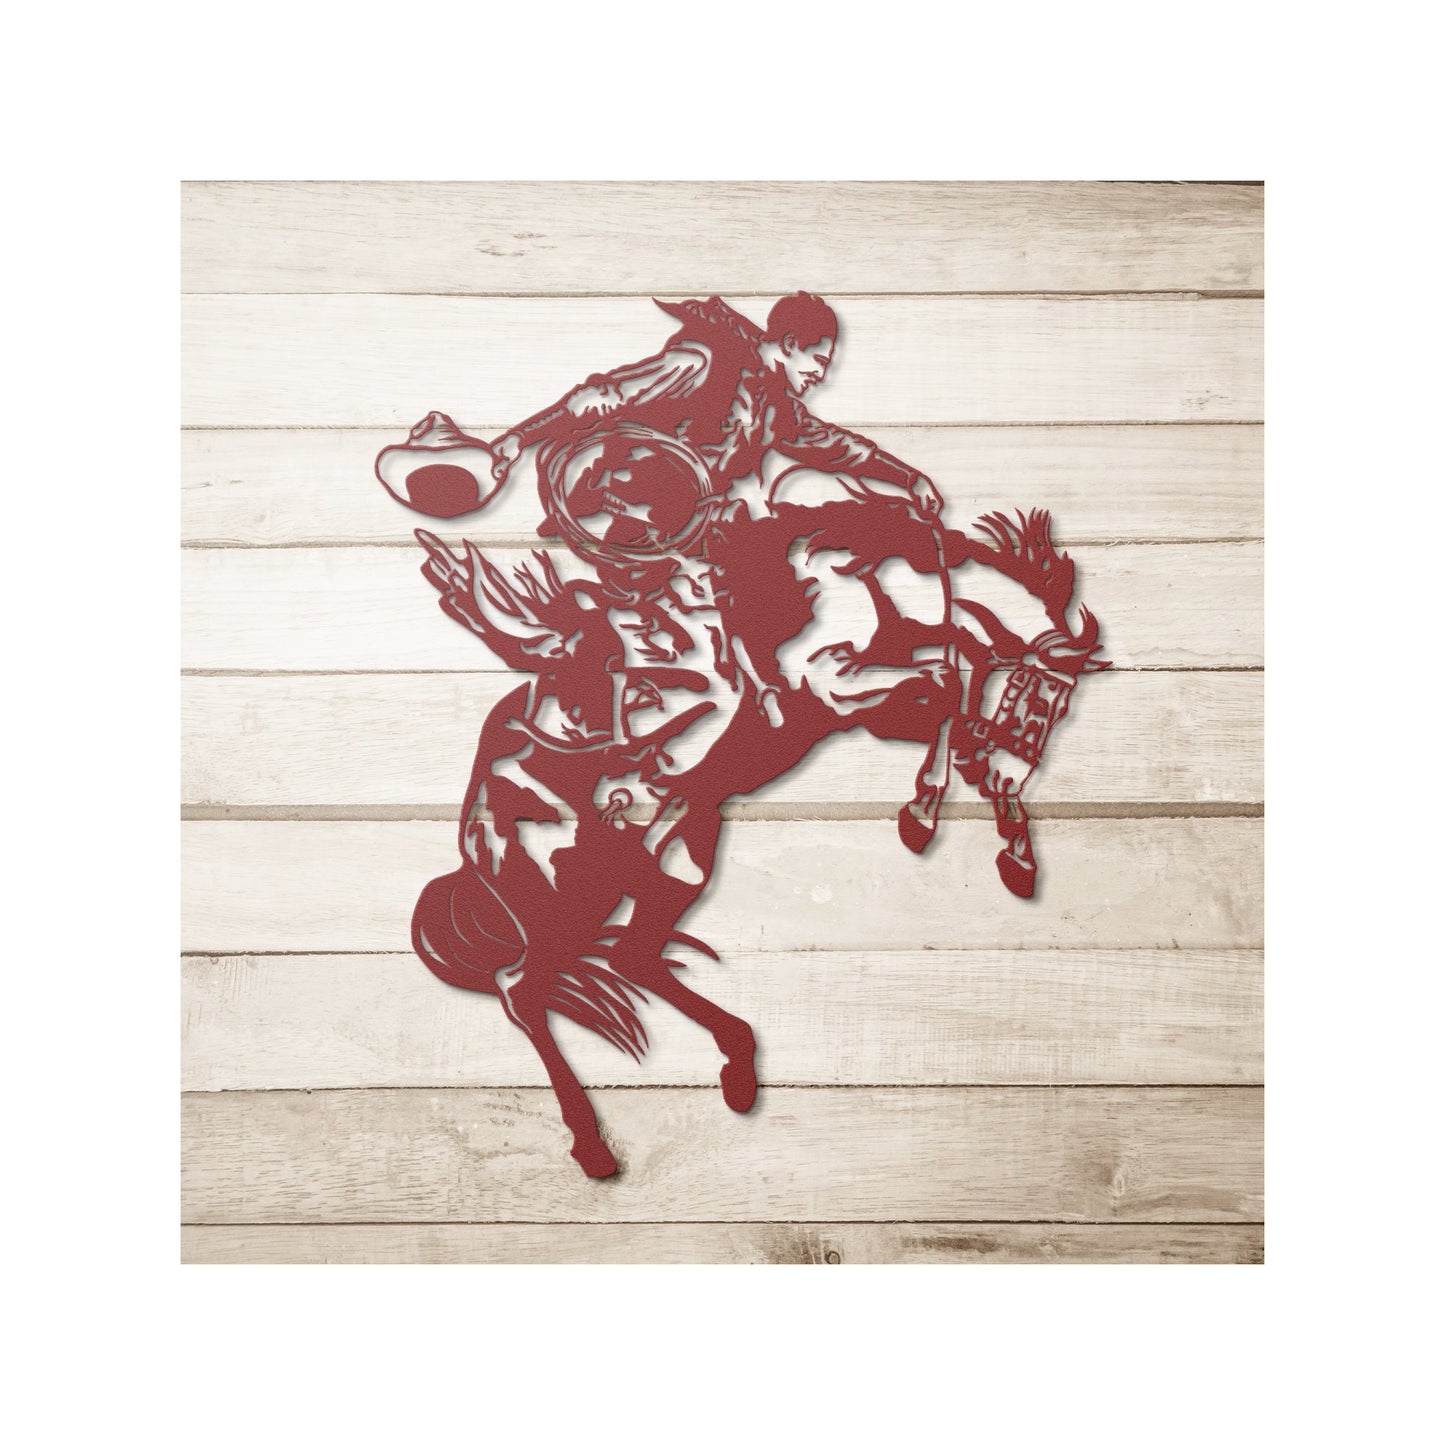 Bronc Riding Cowboy Vintage Old Western Cowboy Metal Wall Decor Ranch Artwork for Cattle or Horse Ranch and Farm, Rustic Wall Art